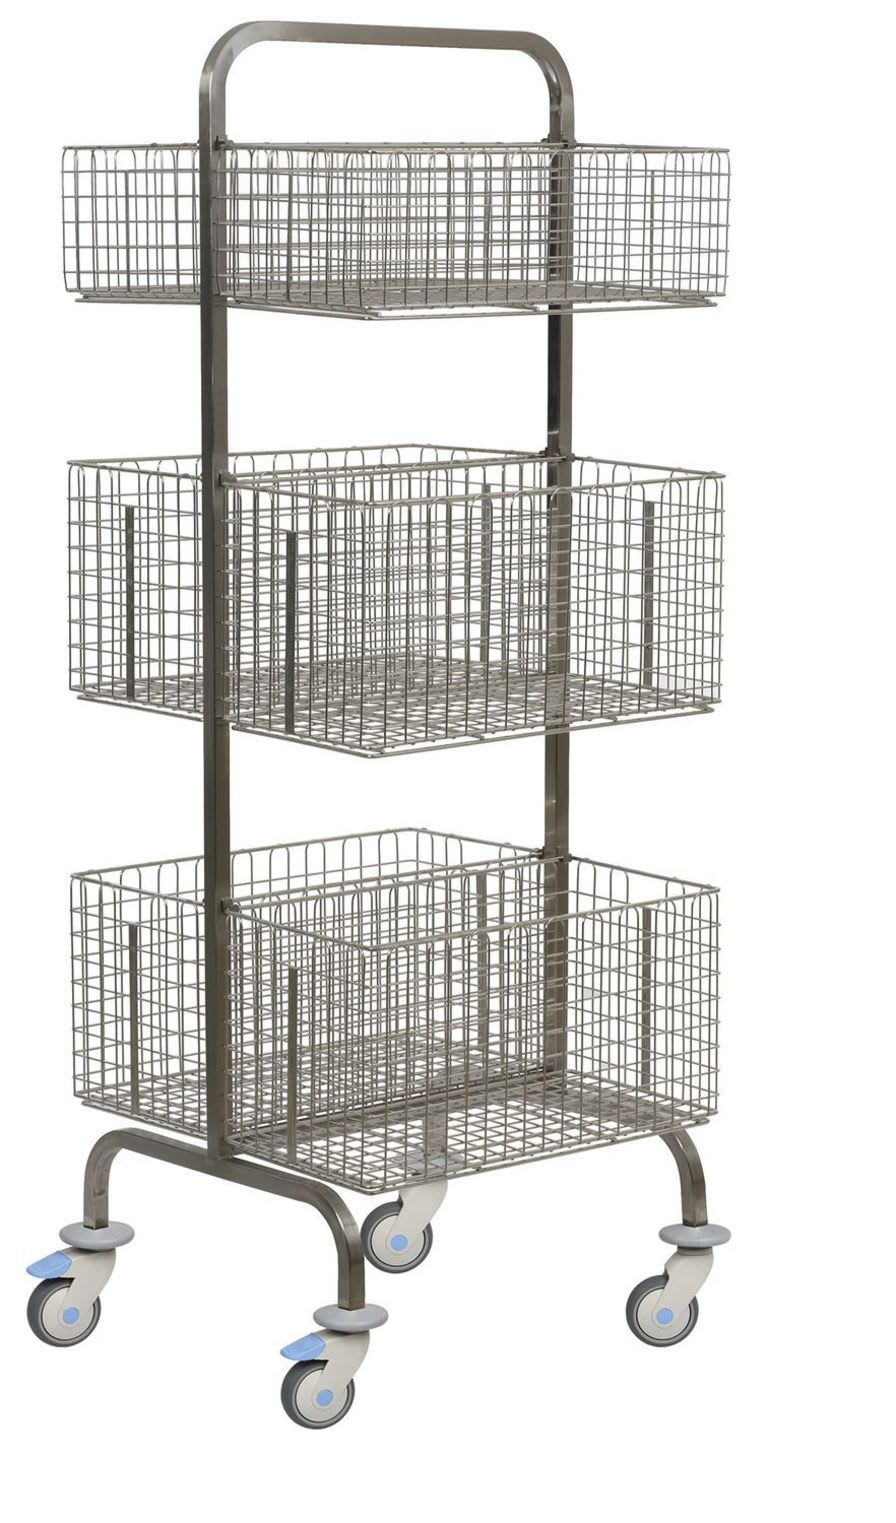 Transport trolley / with basket / open-structure MSA 3340 MIXTA STAINLESS STEEL HOSPITAL EQUIPMENTS